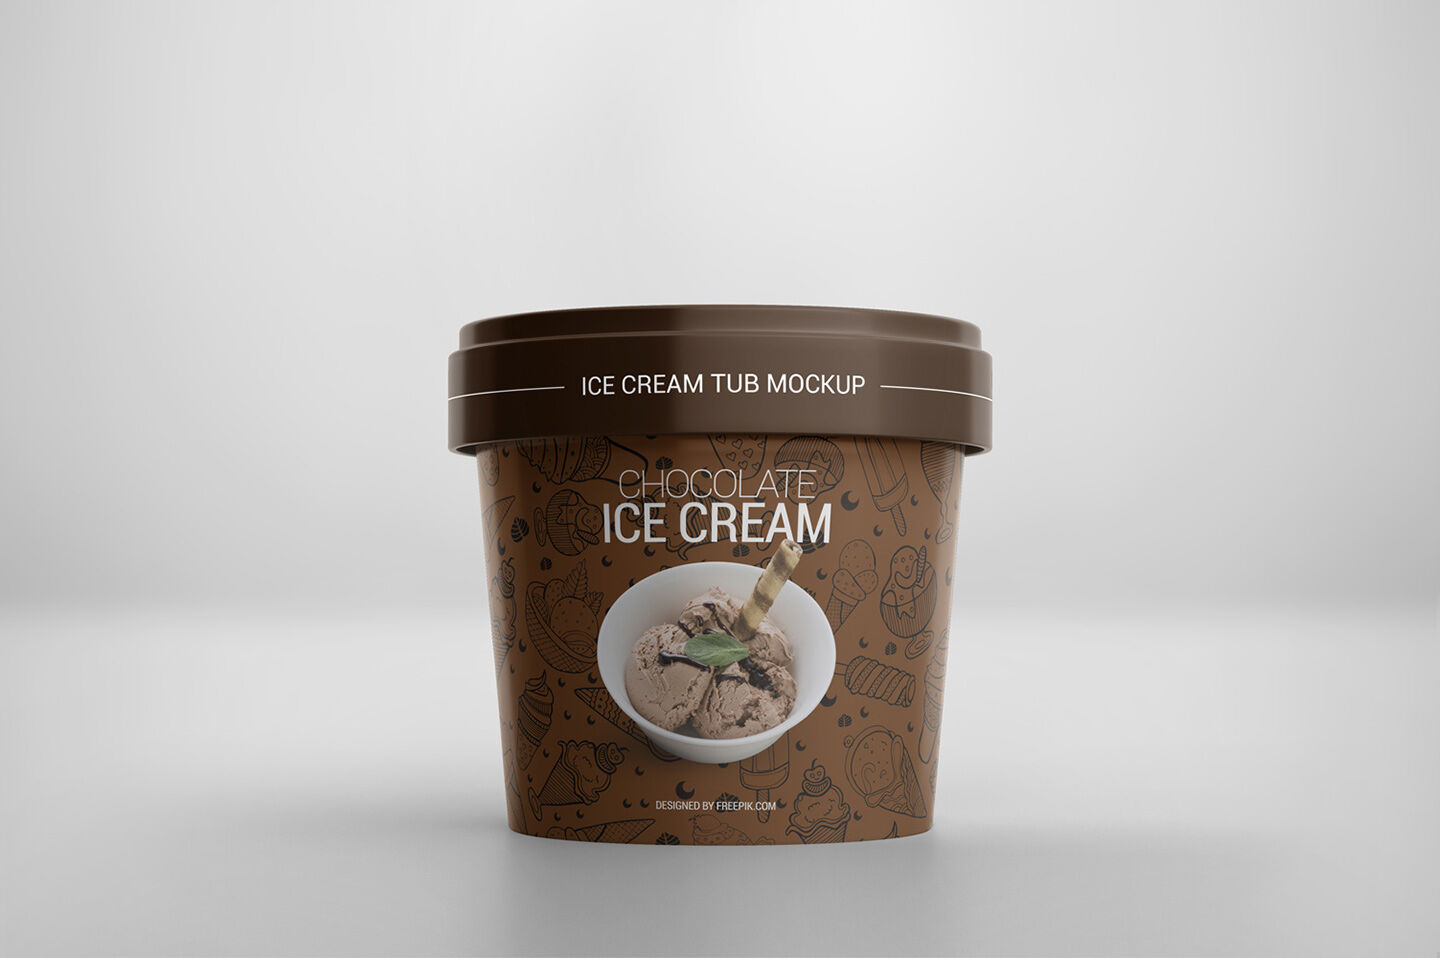 Download Ice Cream Cup Mockup By Pixelica21 Thehungryjpeg Com